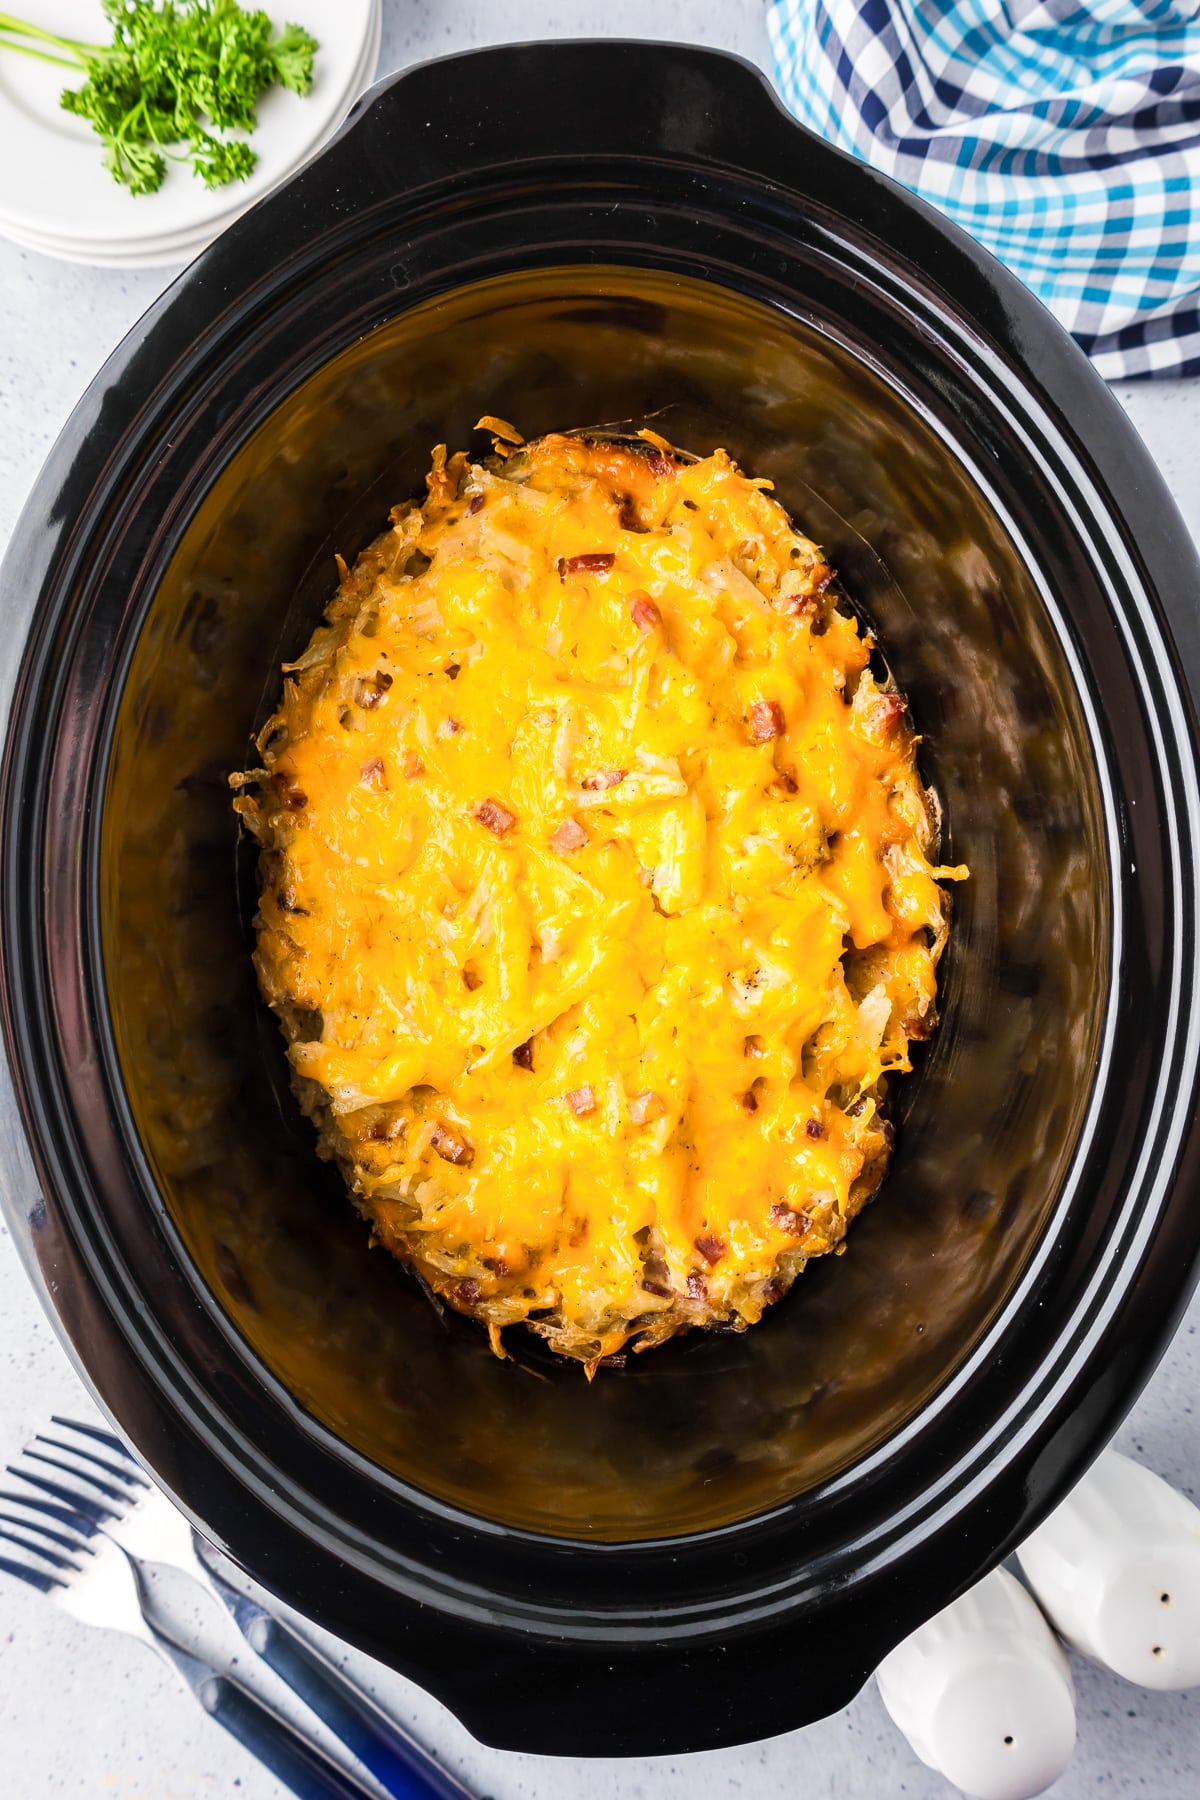 Cheesy slow cooker hashbrown casserole in the base of a crockpot after cooking.